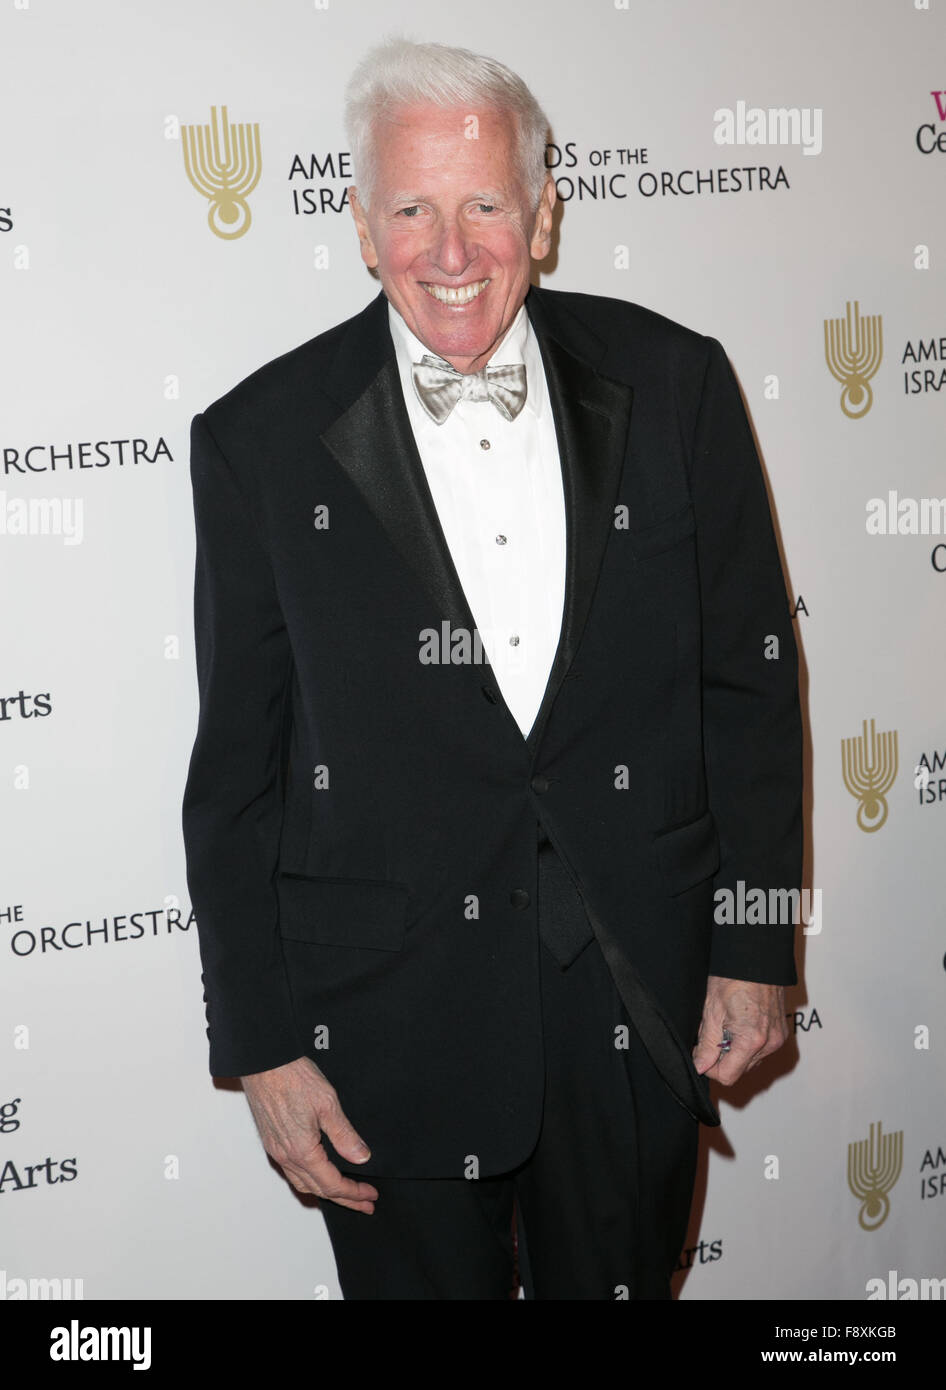 Celebrities attend The Wallis Annenberg Center for the Performing Arts and the American Friends of the Israel Philharmonic Orchestra’s “Duet Gala” at Wallis Annenberg Center for the Performing Arts in Beverly Hills.  Featuring: Jerry Magnin Where: Los Ang Stock Photo